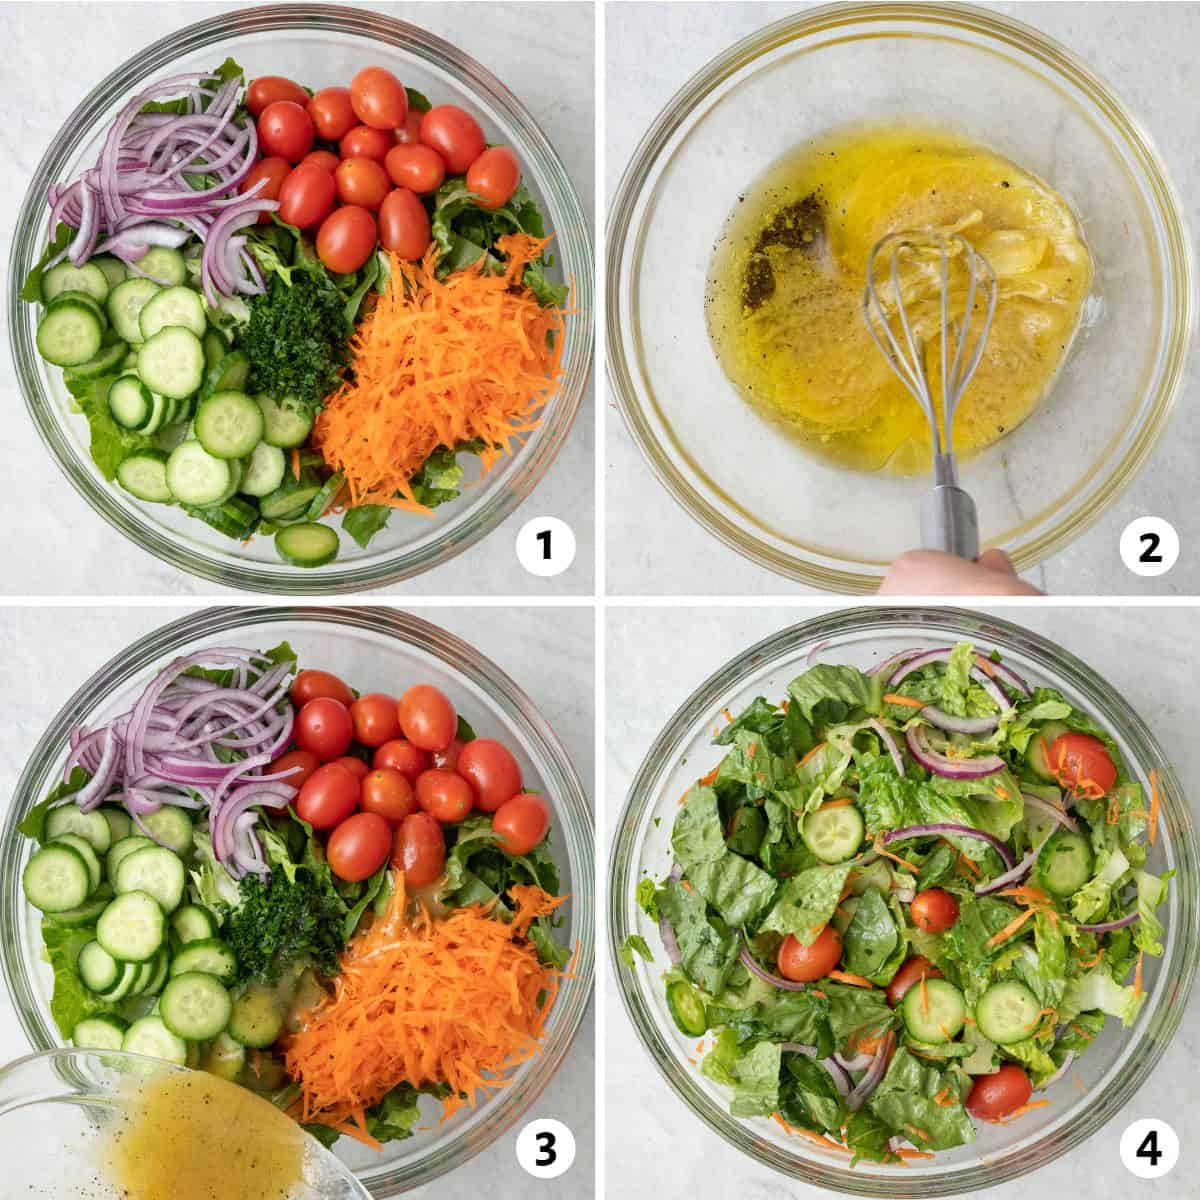 4-picture collage crafting recipe: 1- salad ingredients in bowl before tossing, 2- dressing ingredients are whisked, 3- dressing is poured over the salad, 4- salad after tossing.